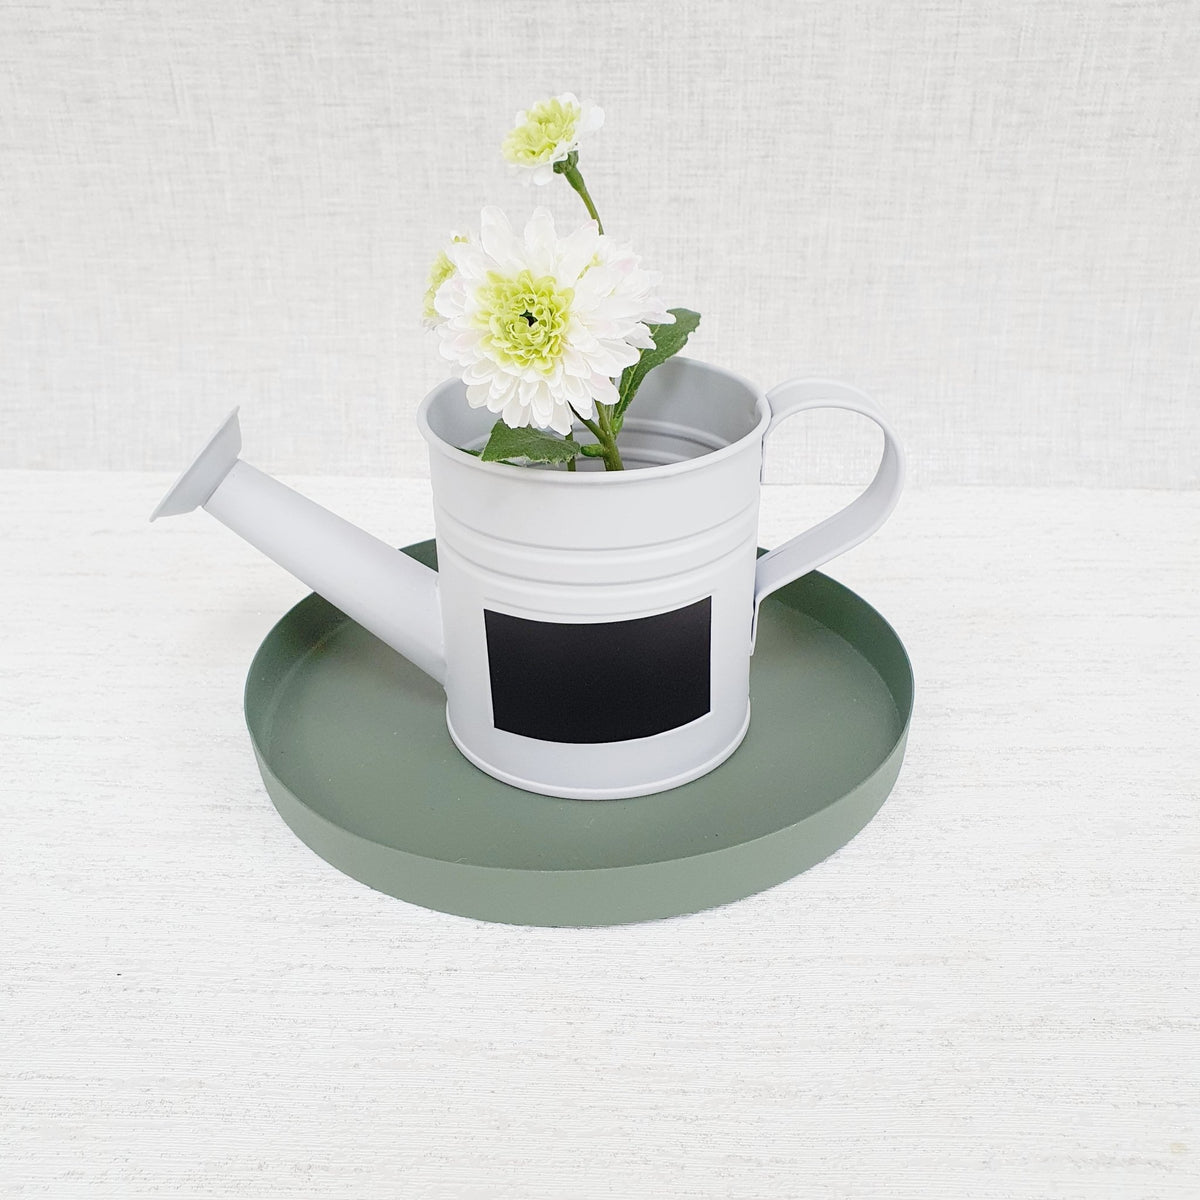 Mini Watering Can Planter on green decorative tray